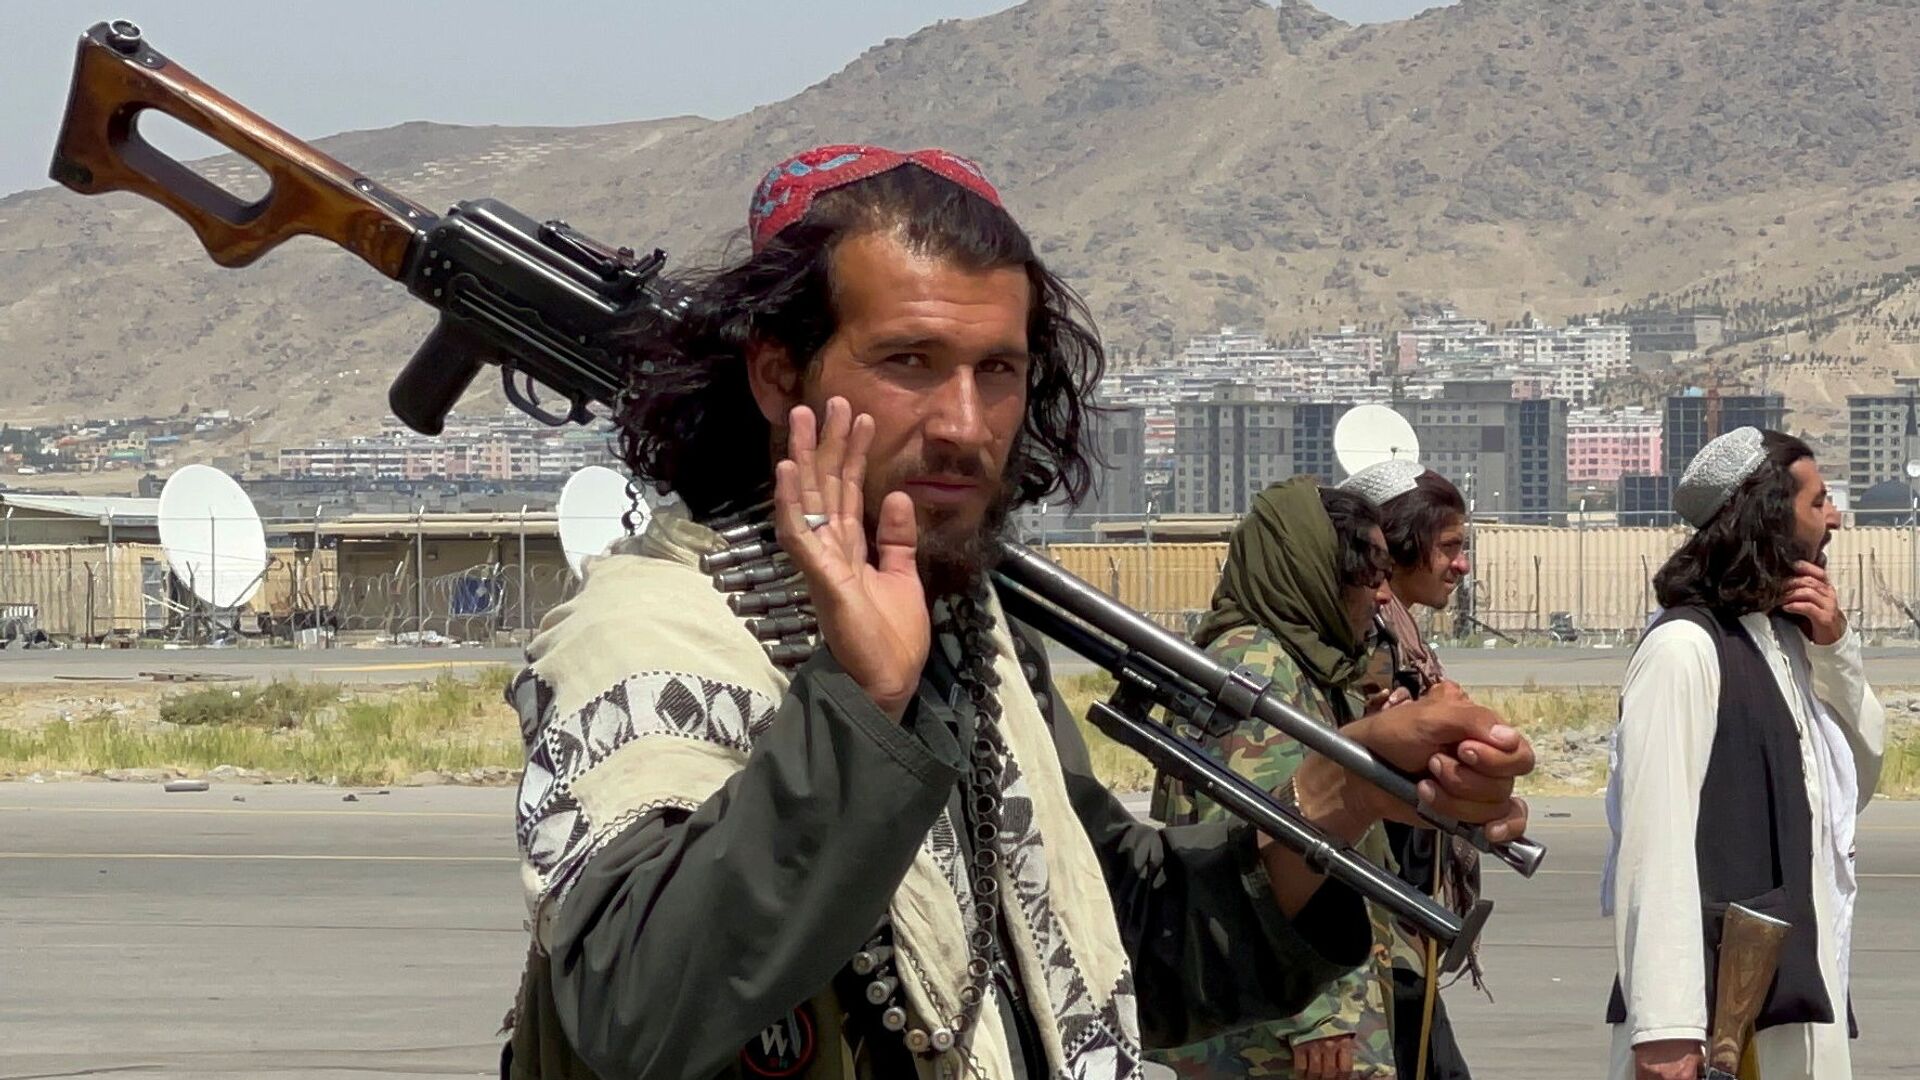 Taliban forces patrol at a runway a day after U.S troops withdrawal from Hamid Karzai International Airport in Kabul, Afghanistan August 31, 2021 - اسپوتنیک افغانستان  , 1920, 09.12.2021